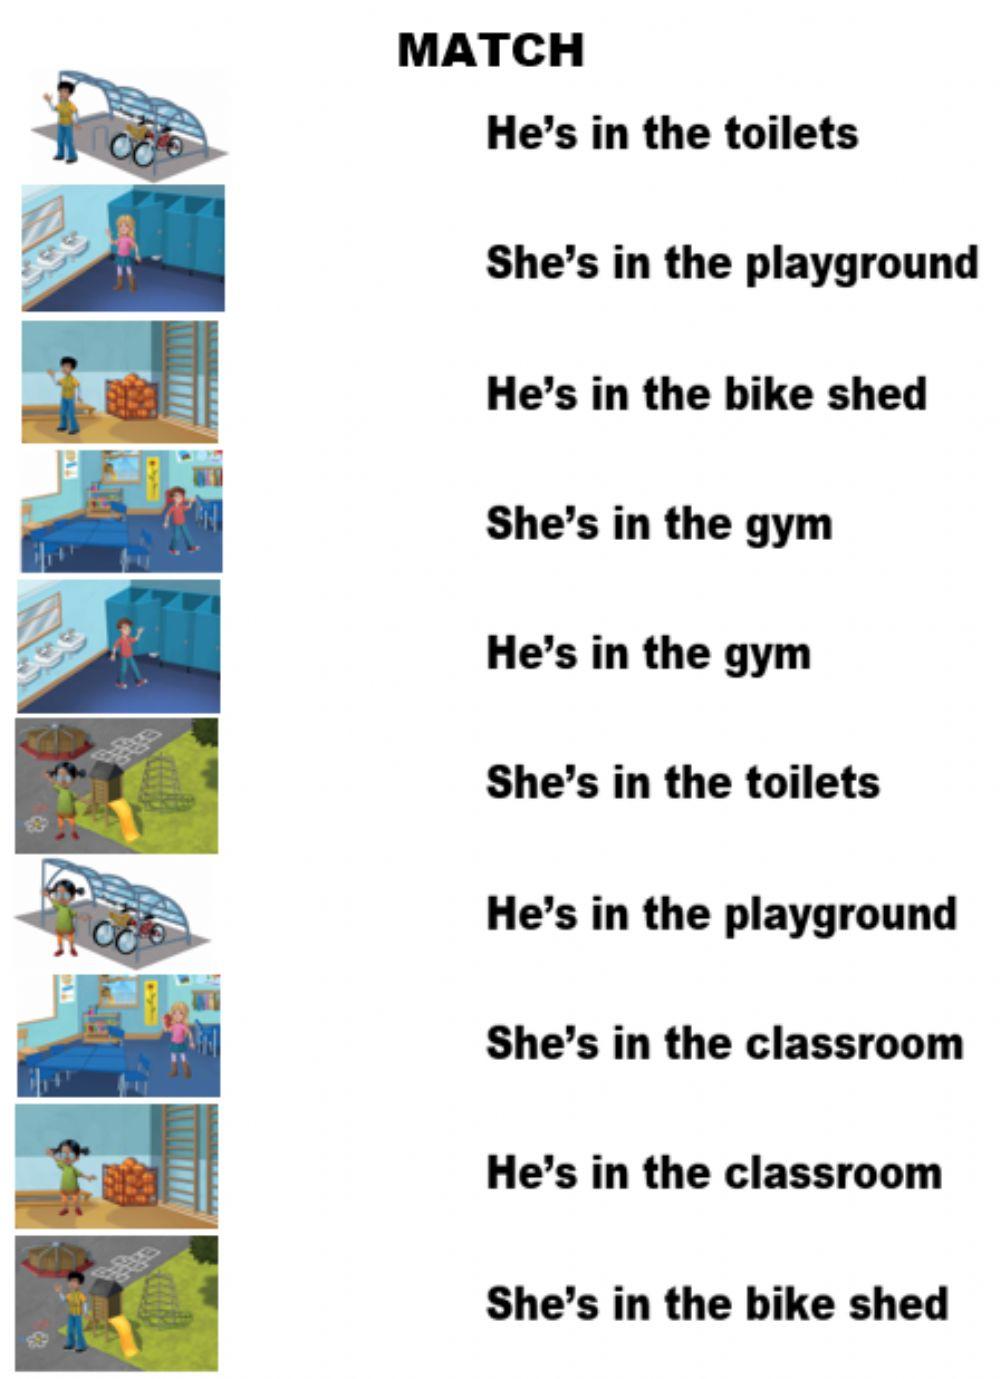 At the playground. Match the sentences.